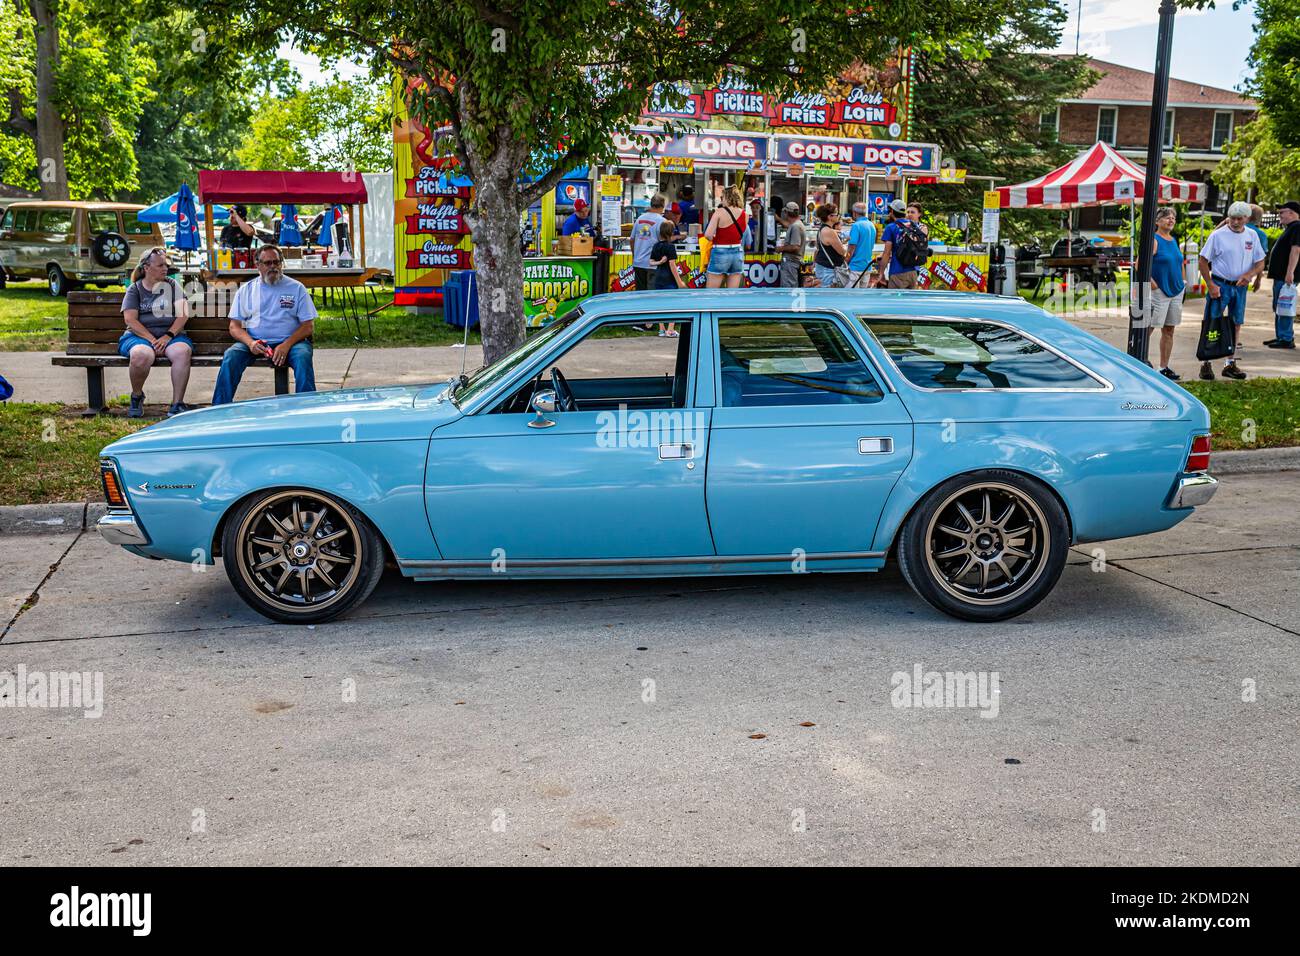 Des Moines, IA - July 01, 2022: High perspective side view of a 1971 AMC Hornet Sportabout Wagon at a local car show. Stock Photo